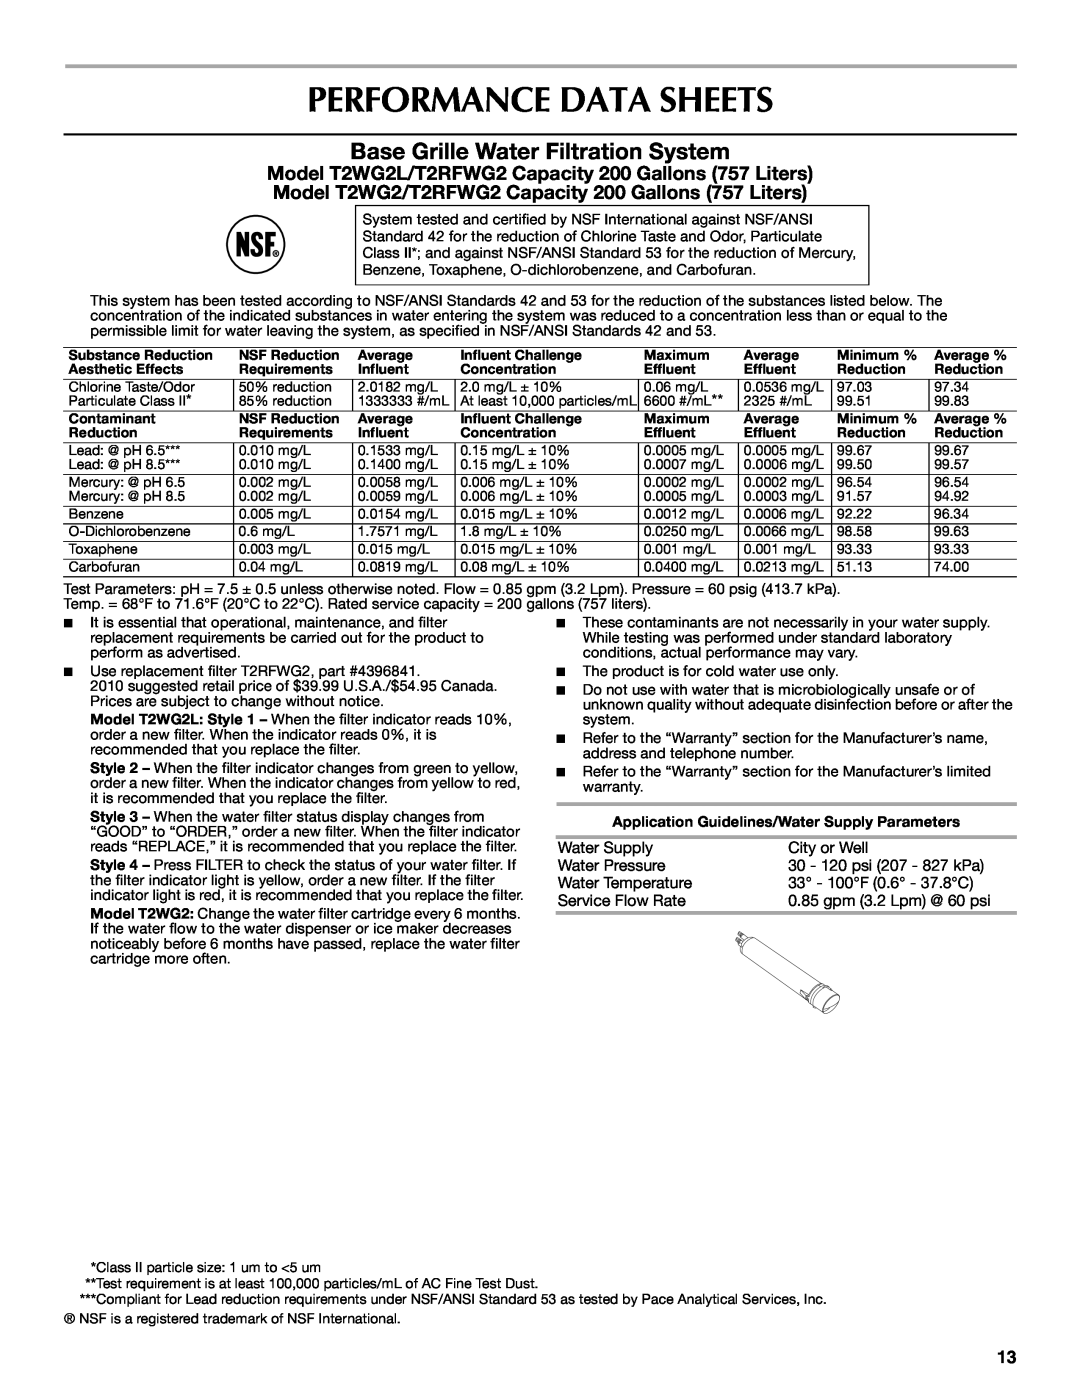 Maytag W10321477A installation instructions Performance Data Sheets, Base Grille Water Filtration System 